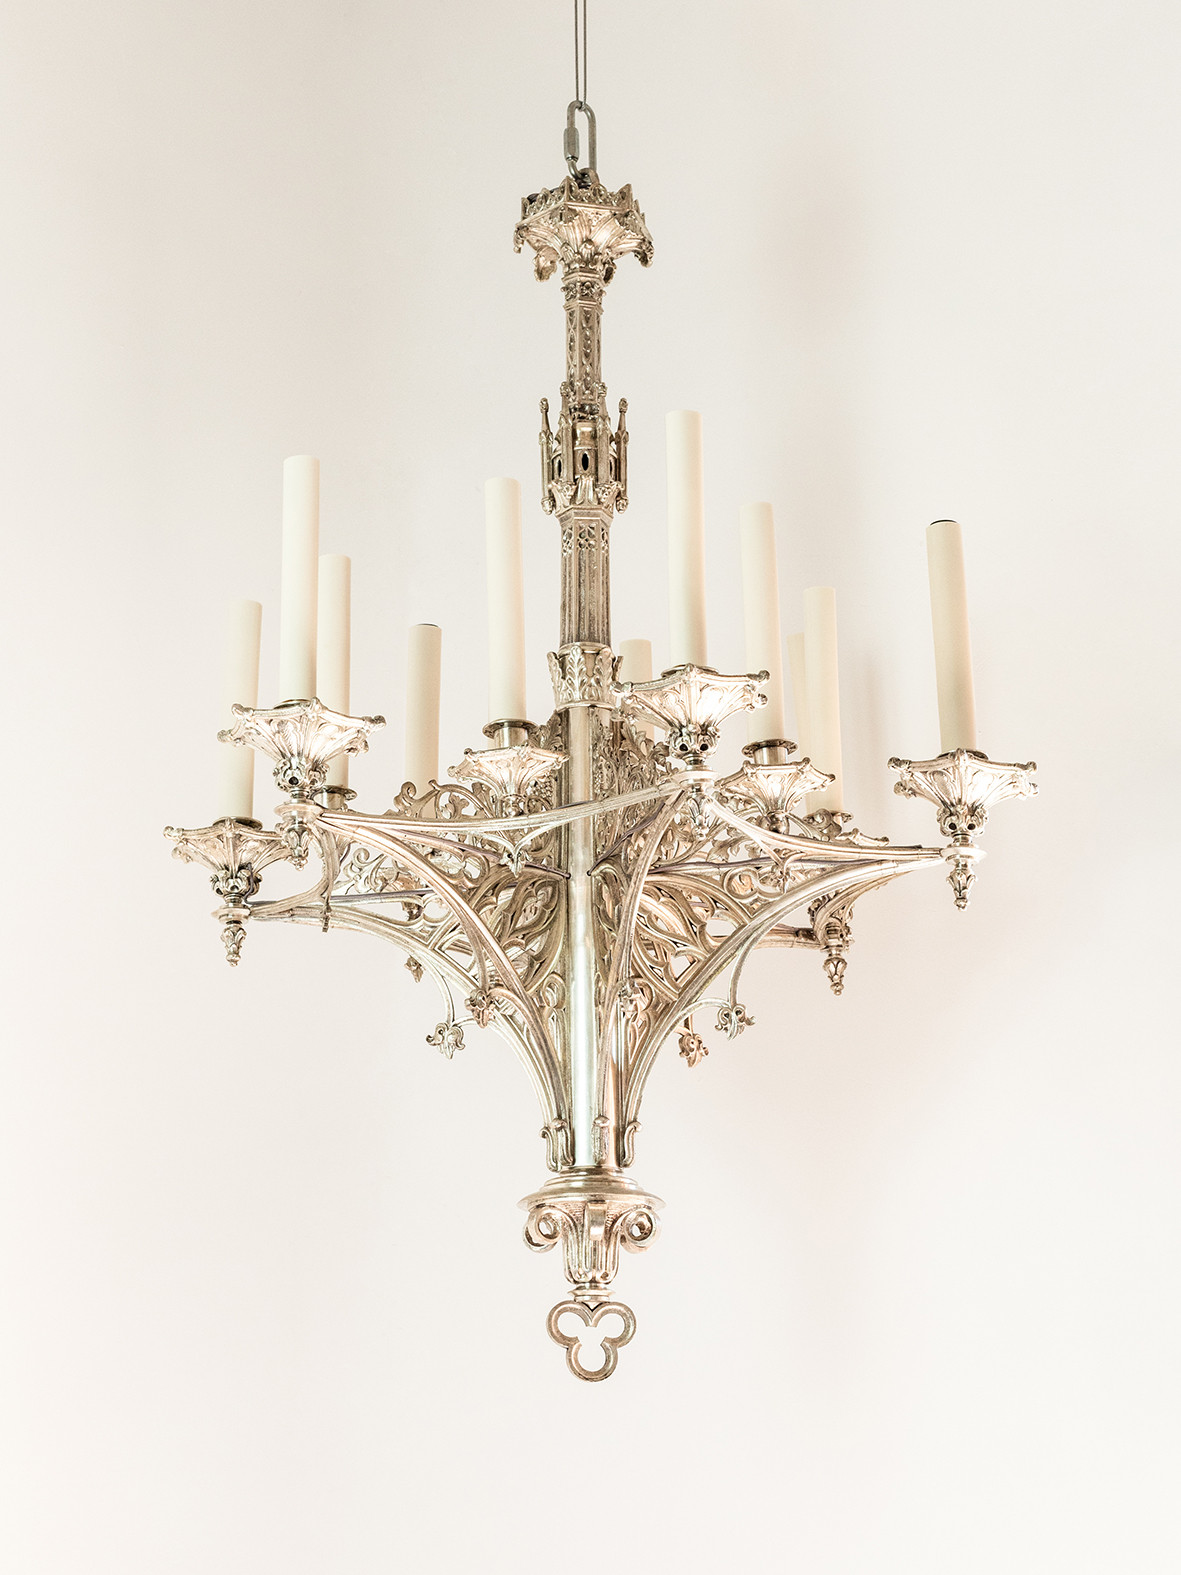 Pair of Neo Gothic chandeliers silver plated bronze by Feuchère